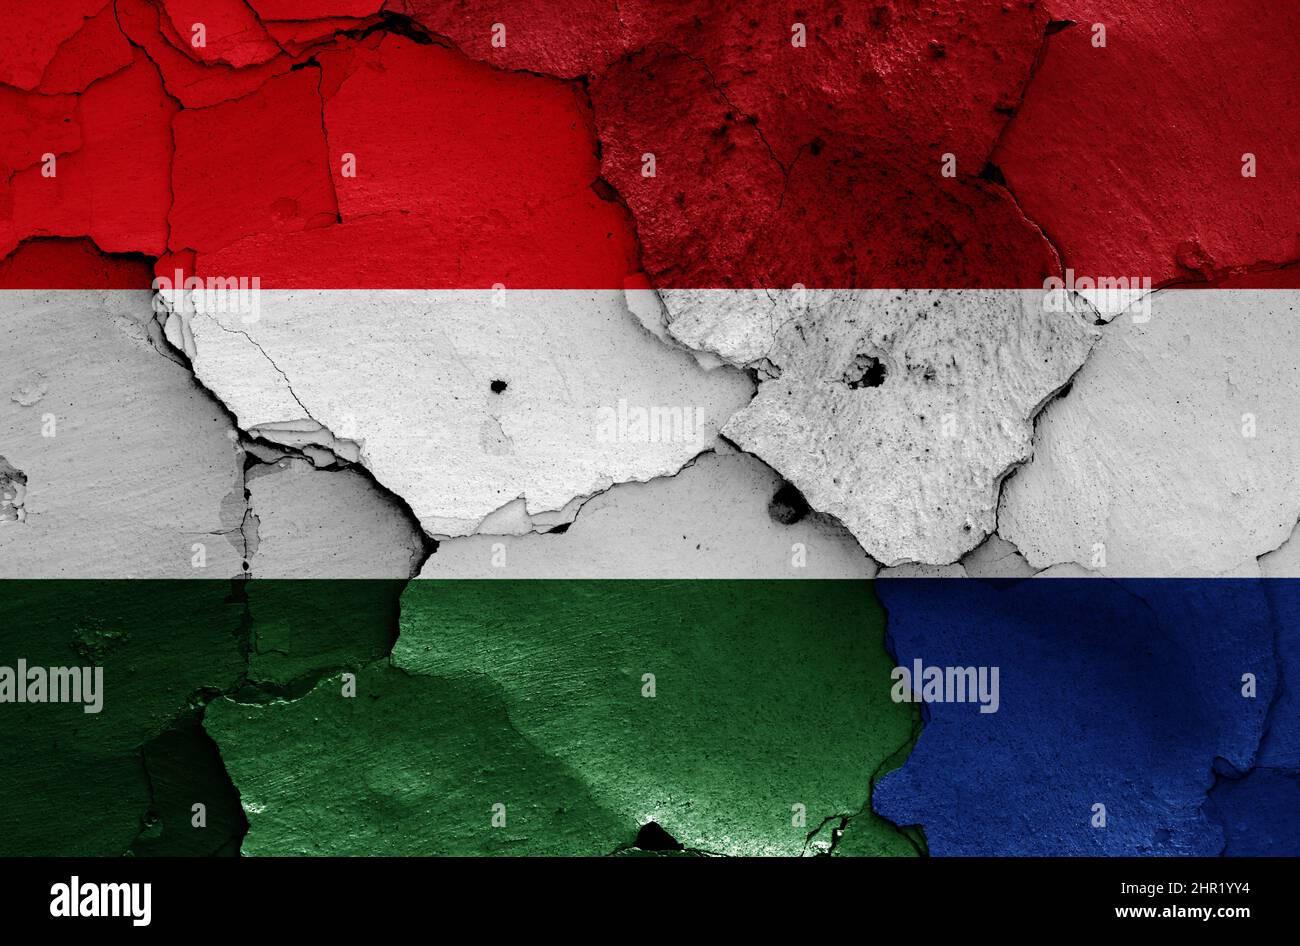 flags of Hungary and Netherlands painted on cracked wall Stock Photo